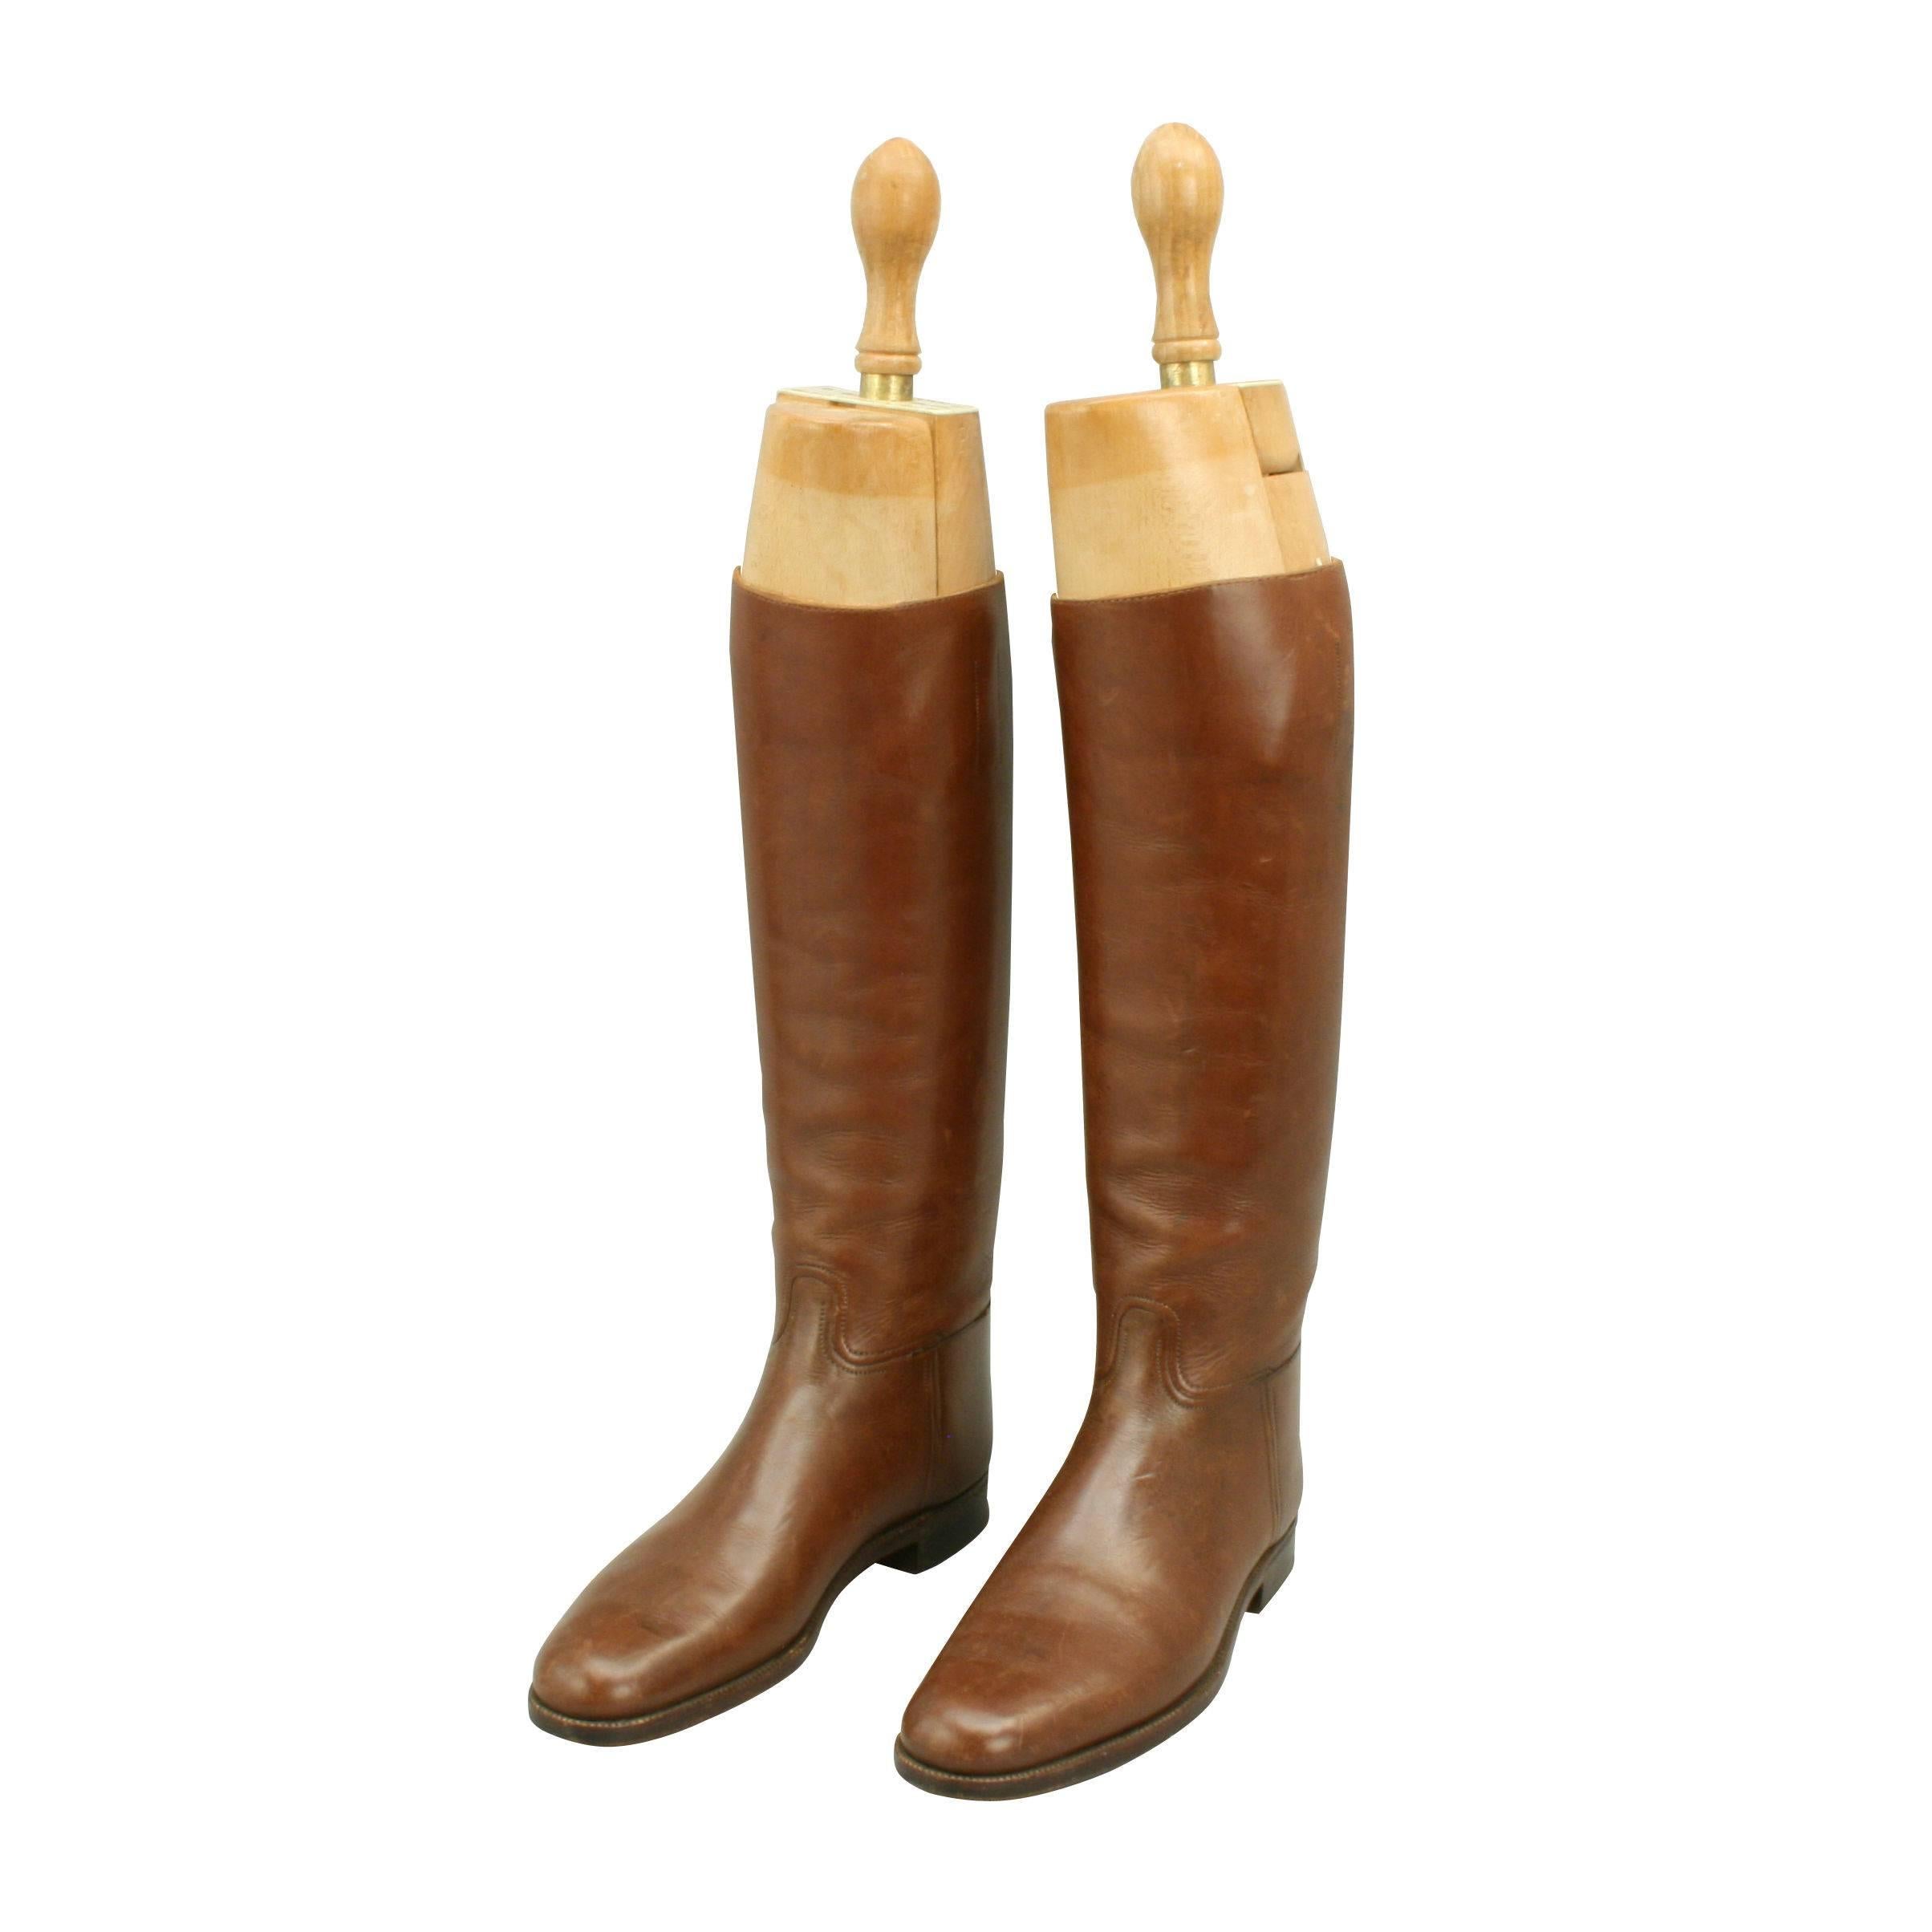 Vintage pair of Peal & Co. brown leather riding boots.
A very good pair of tan leather boots with beech wood trees. The boots are made in England by Peal & Co, 487 Oxford Street, London. Marked in ink under the embossed manufactures details inside